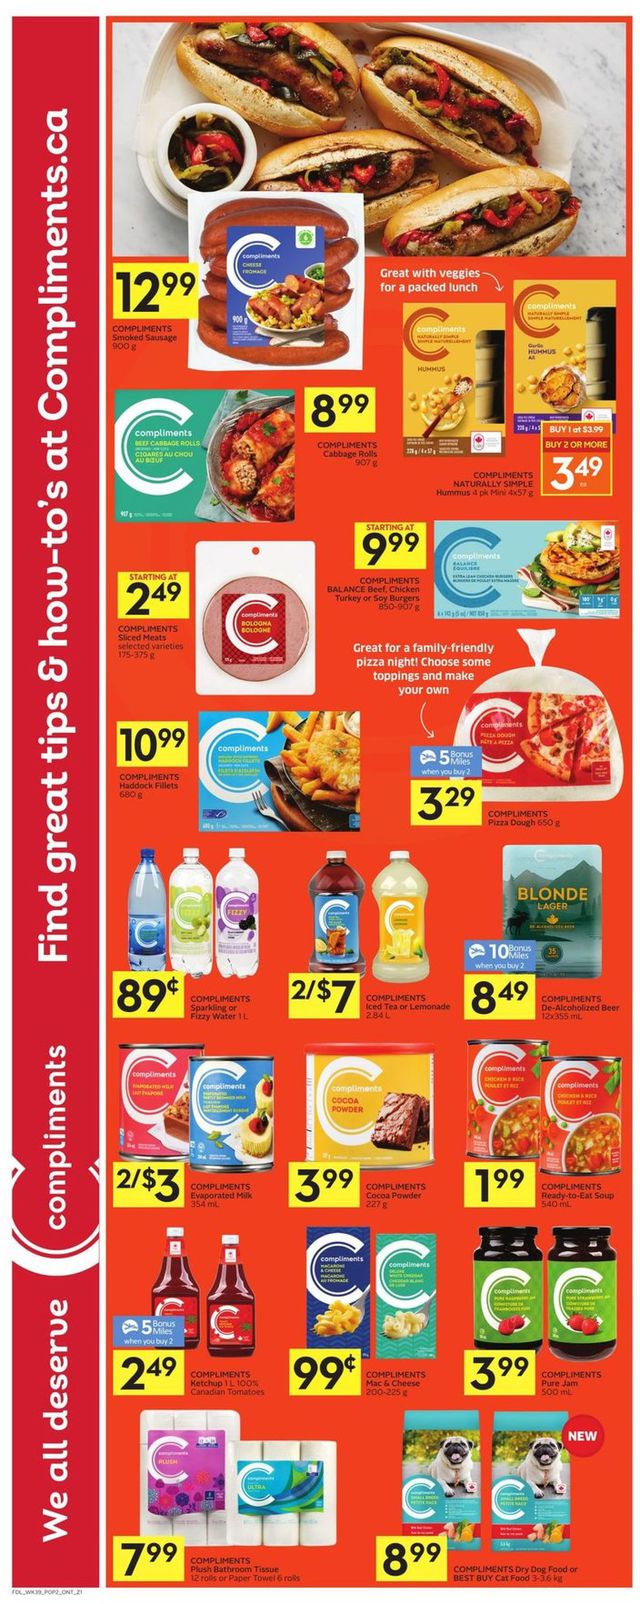 Foodland Flyer from 01/20/2022